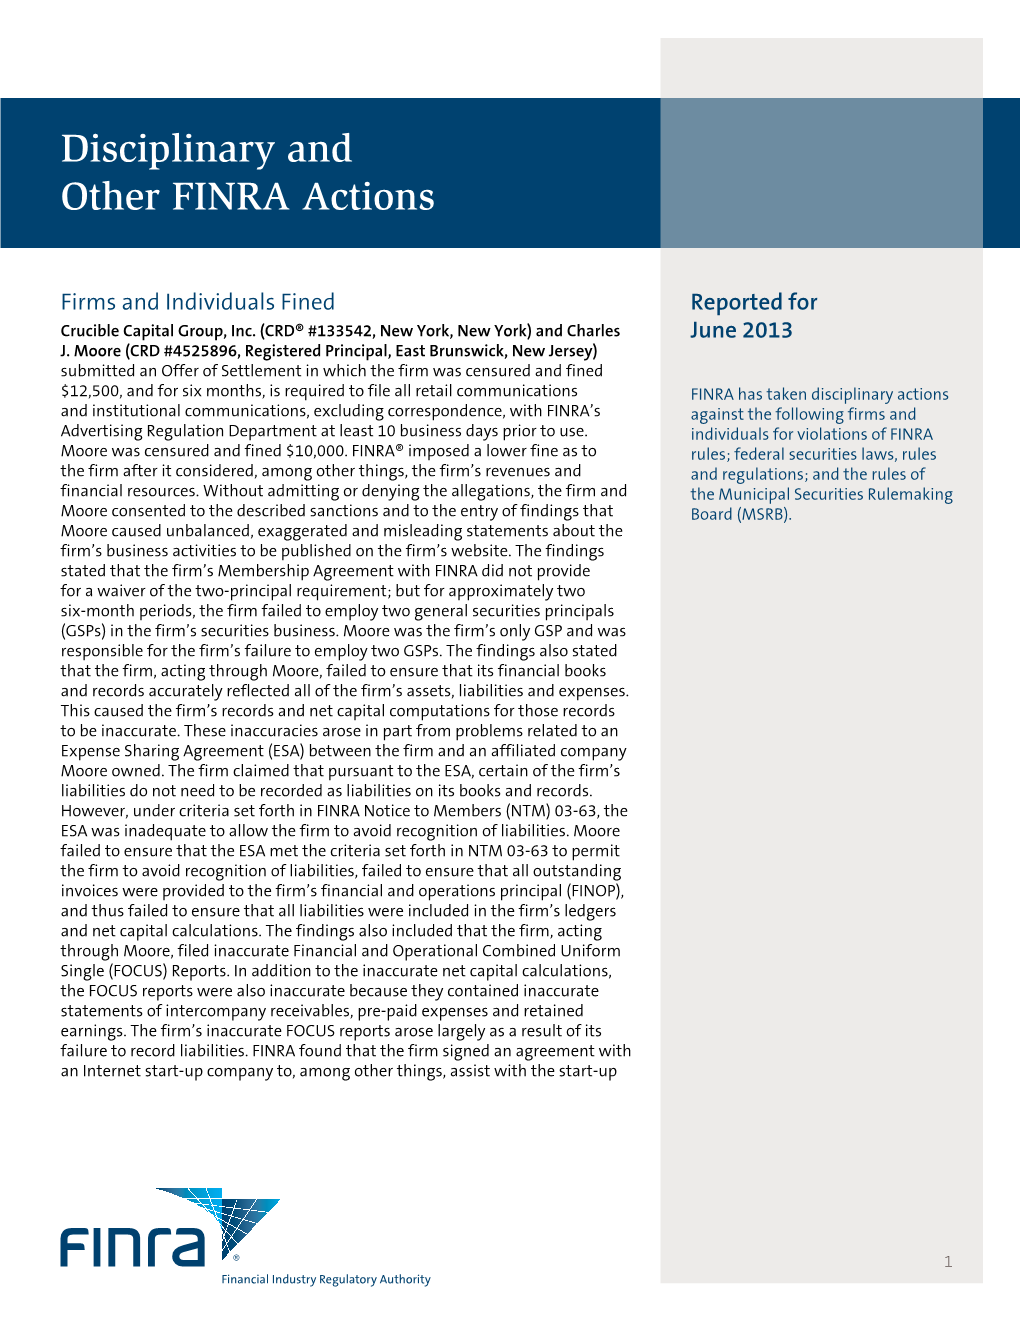 Disciplinary and Other FINRA Actions